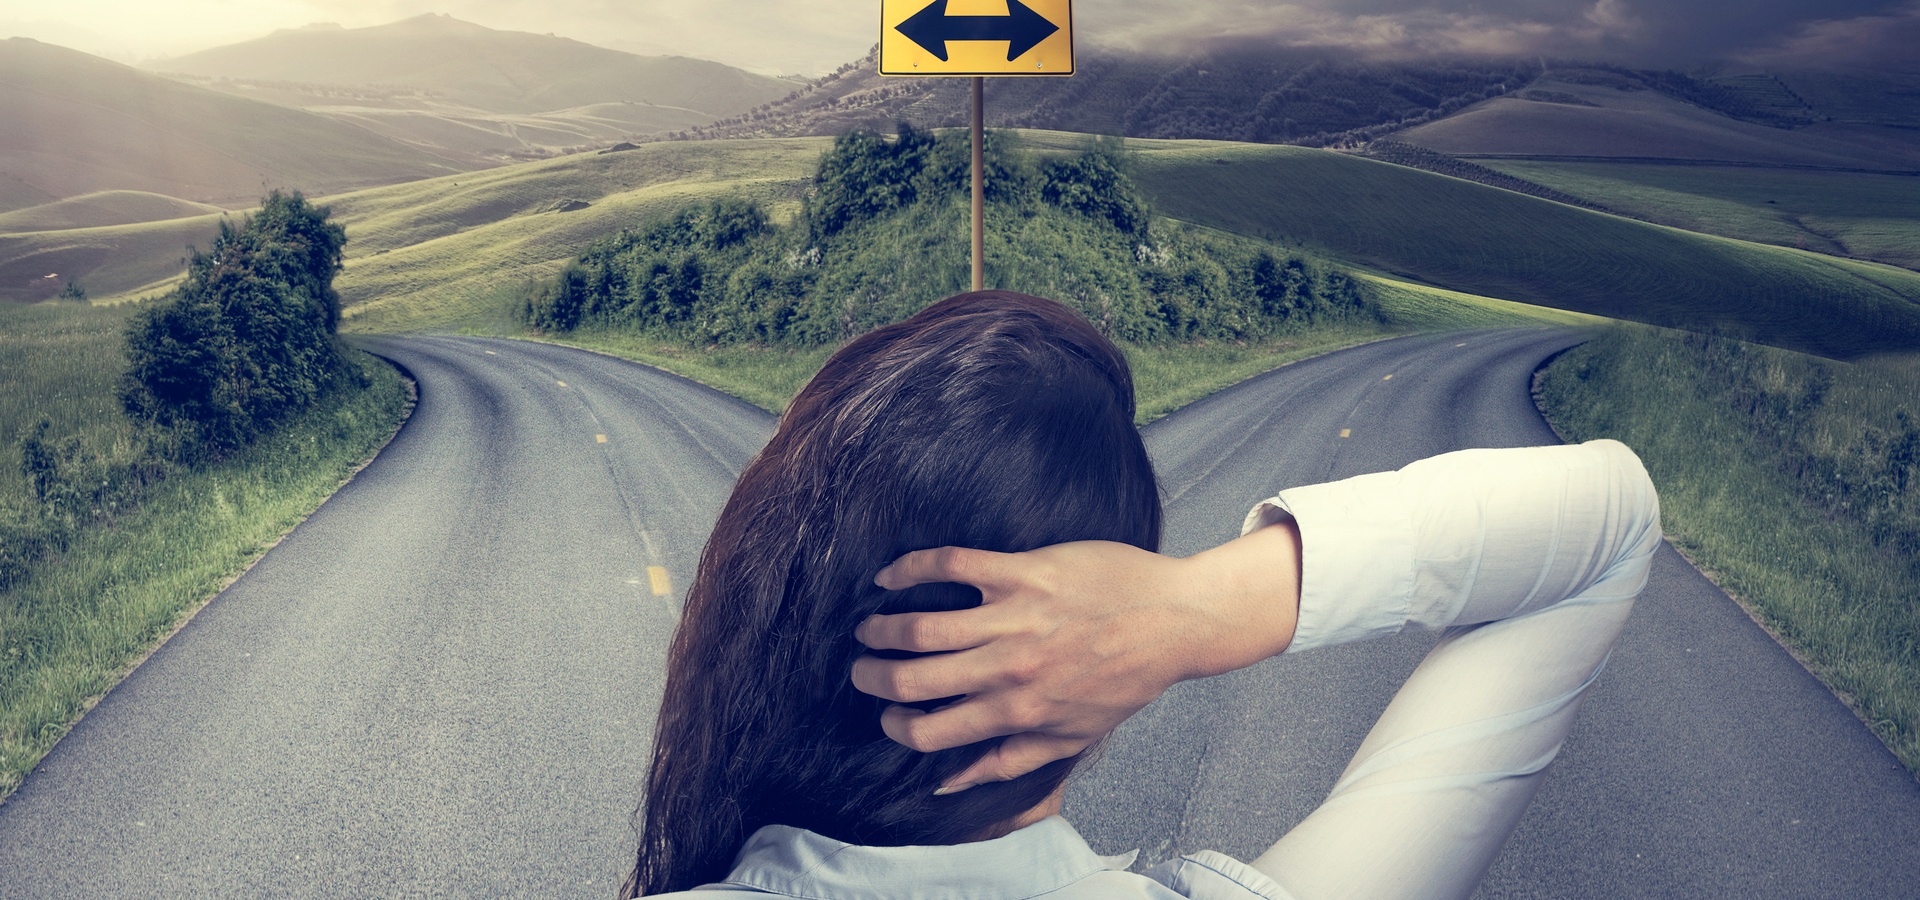 Woman trying to decide which road to take - left or right